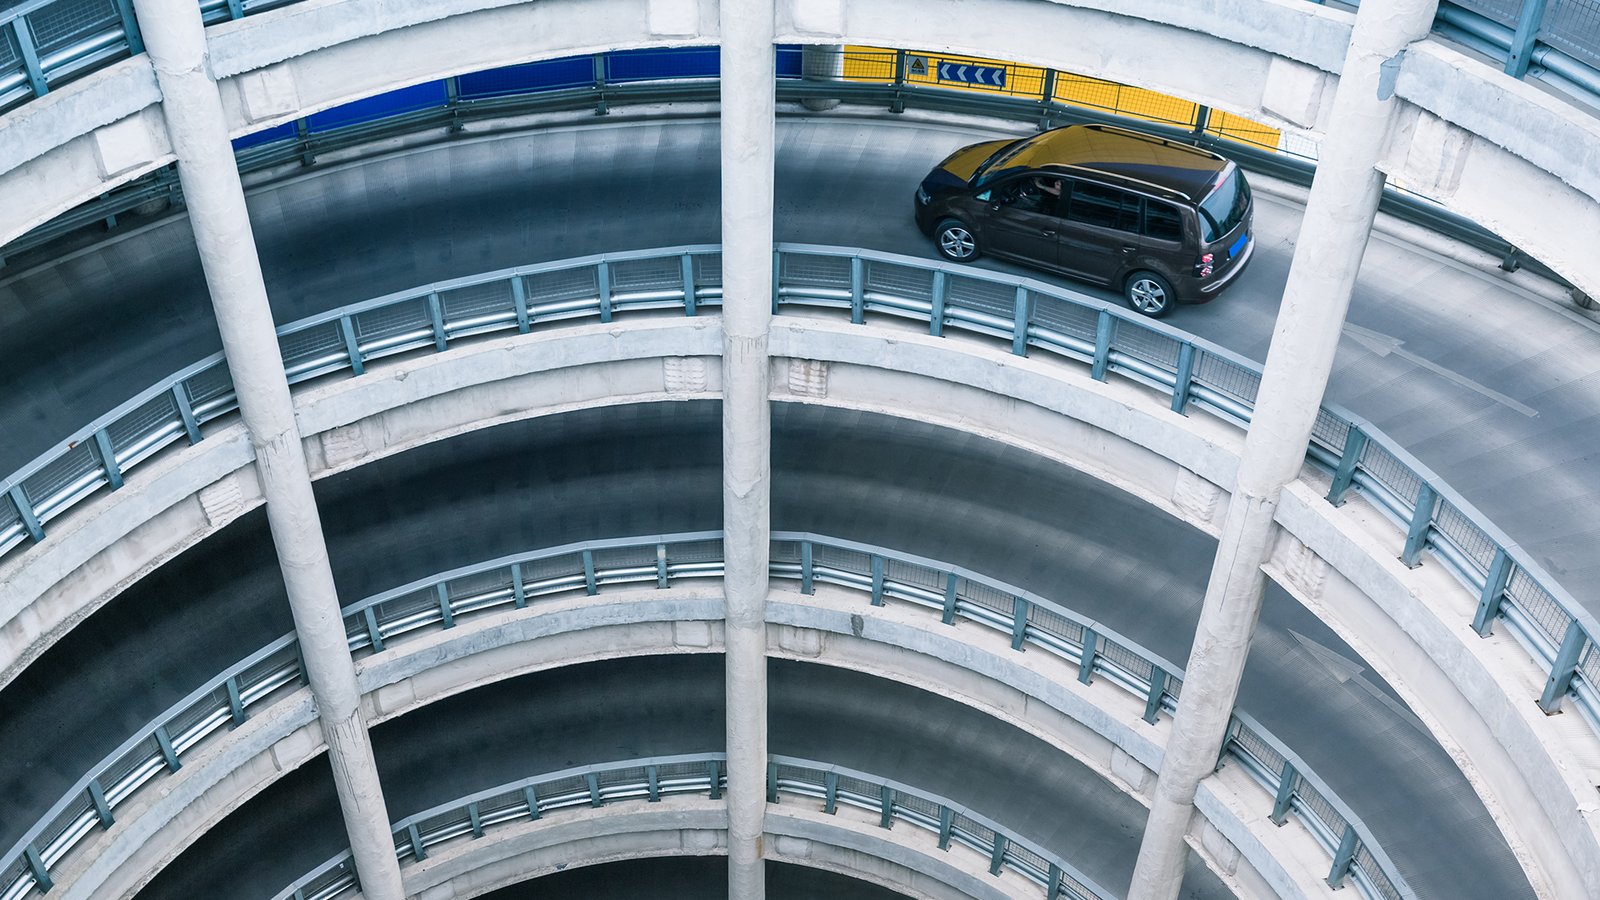 A three story parking lot with an electric vehicle descending from the top. 